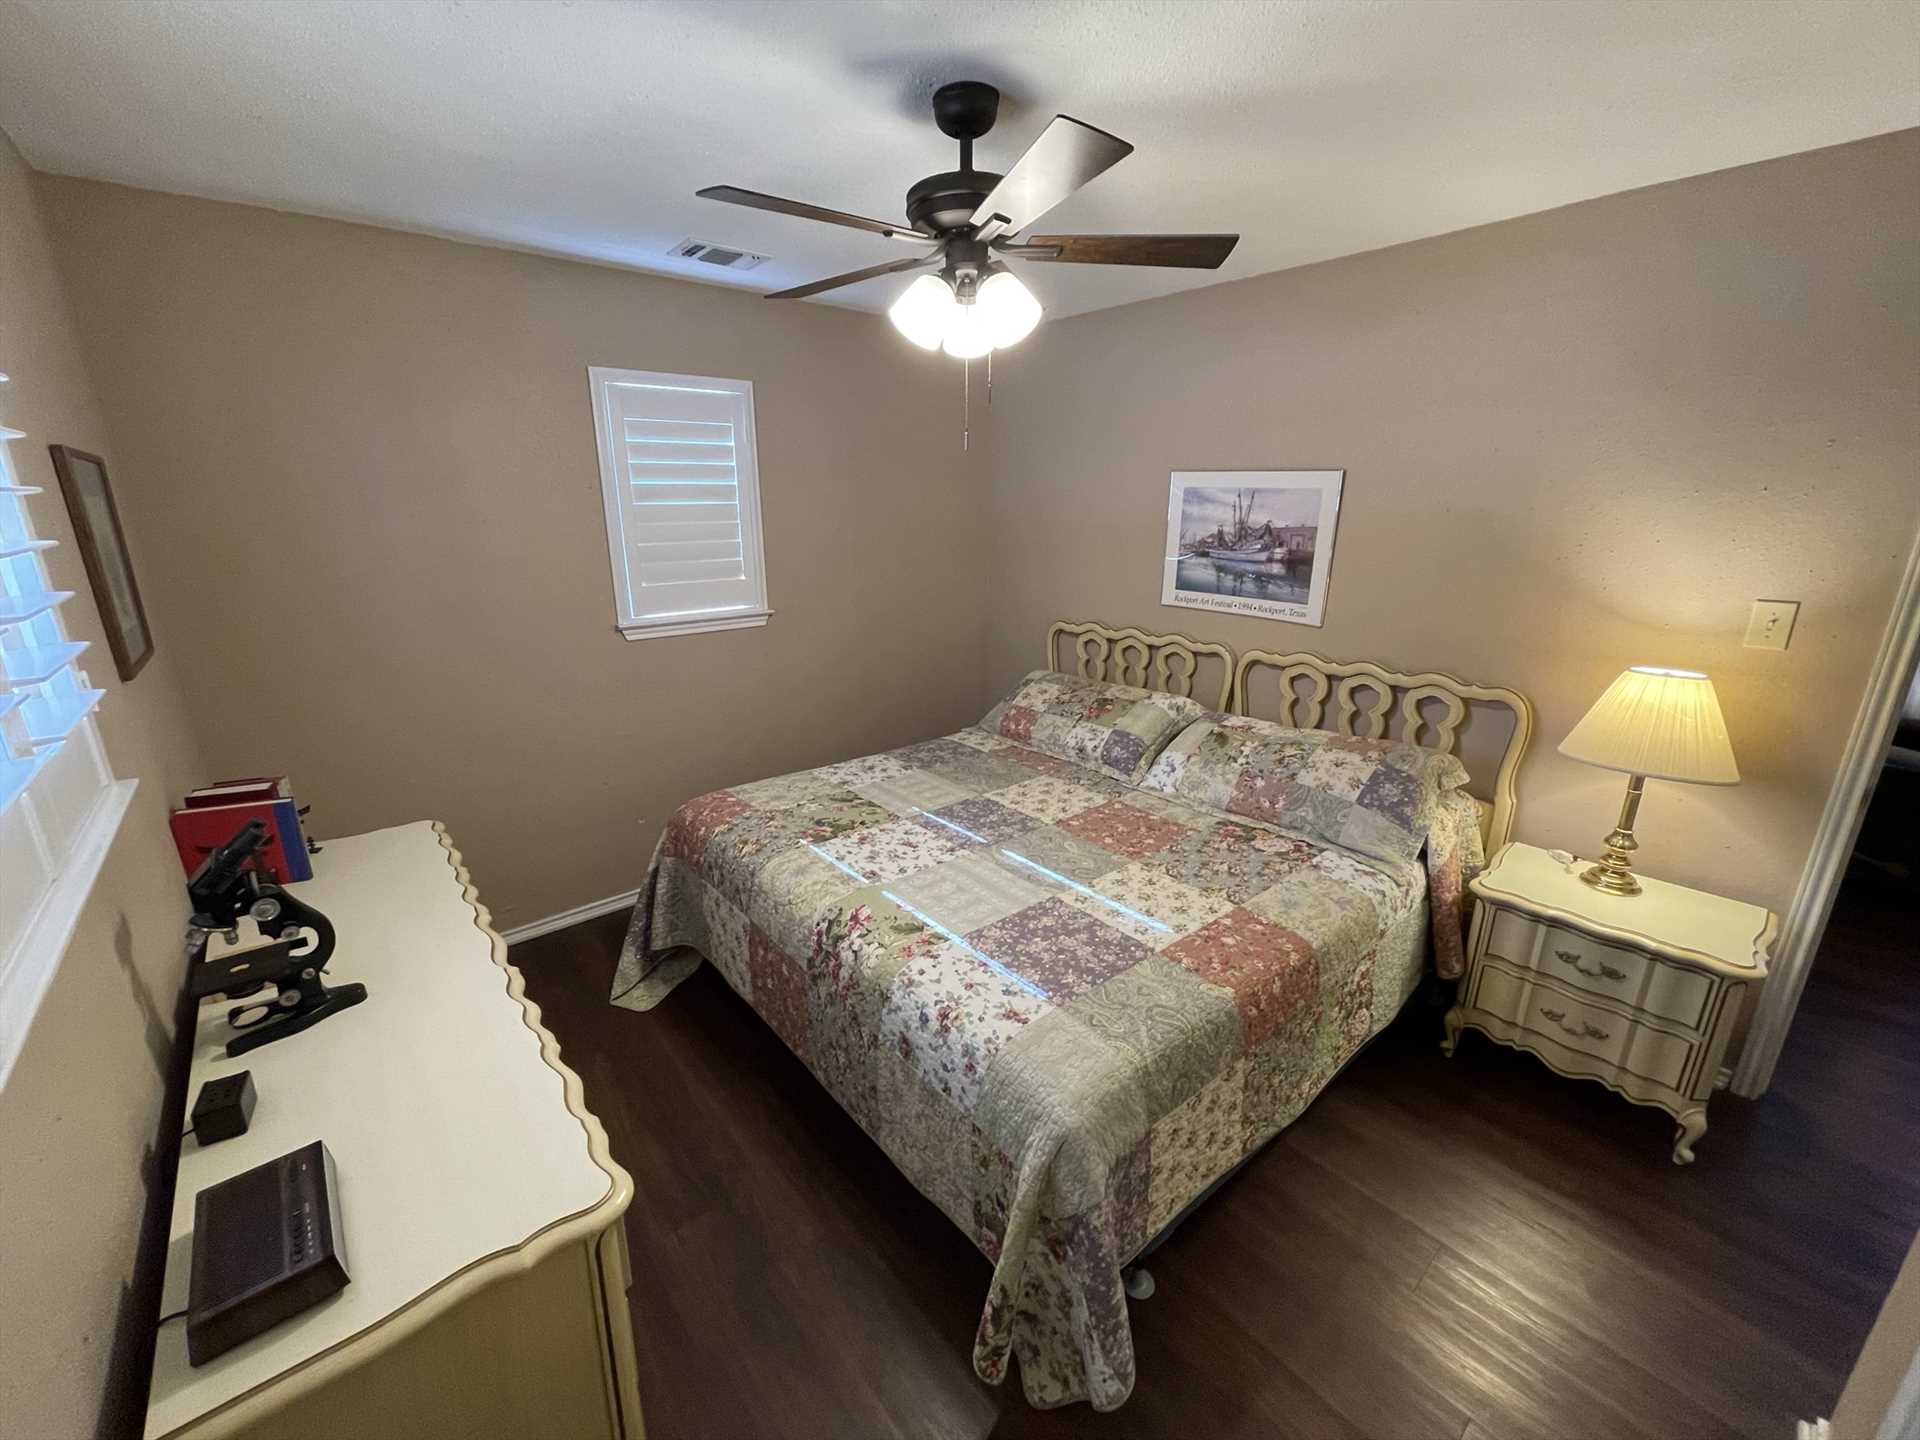                                                 Two guests can sleep in luxurious comfort on the queen bed in the second bedroom. All told, there's soft and warm accommodations for up to four at Lambert Park.